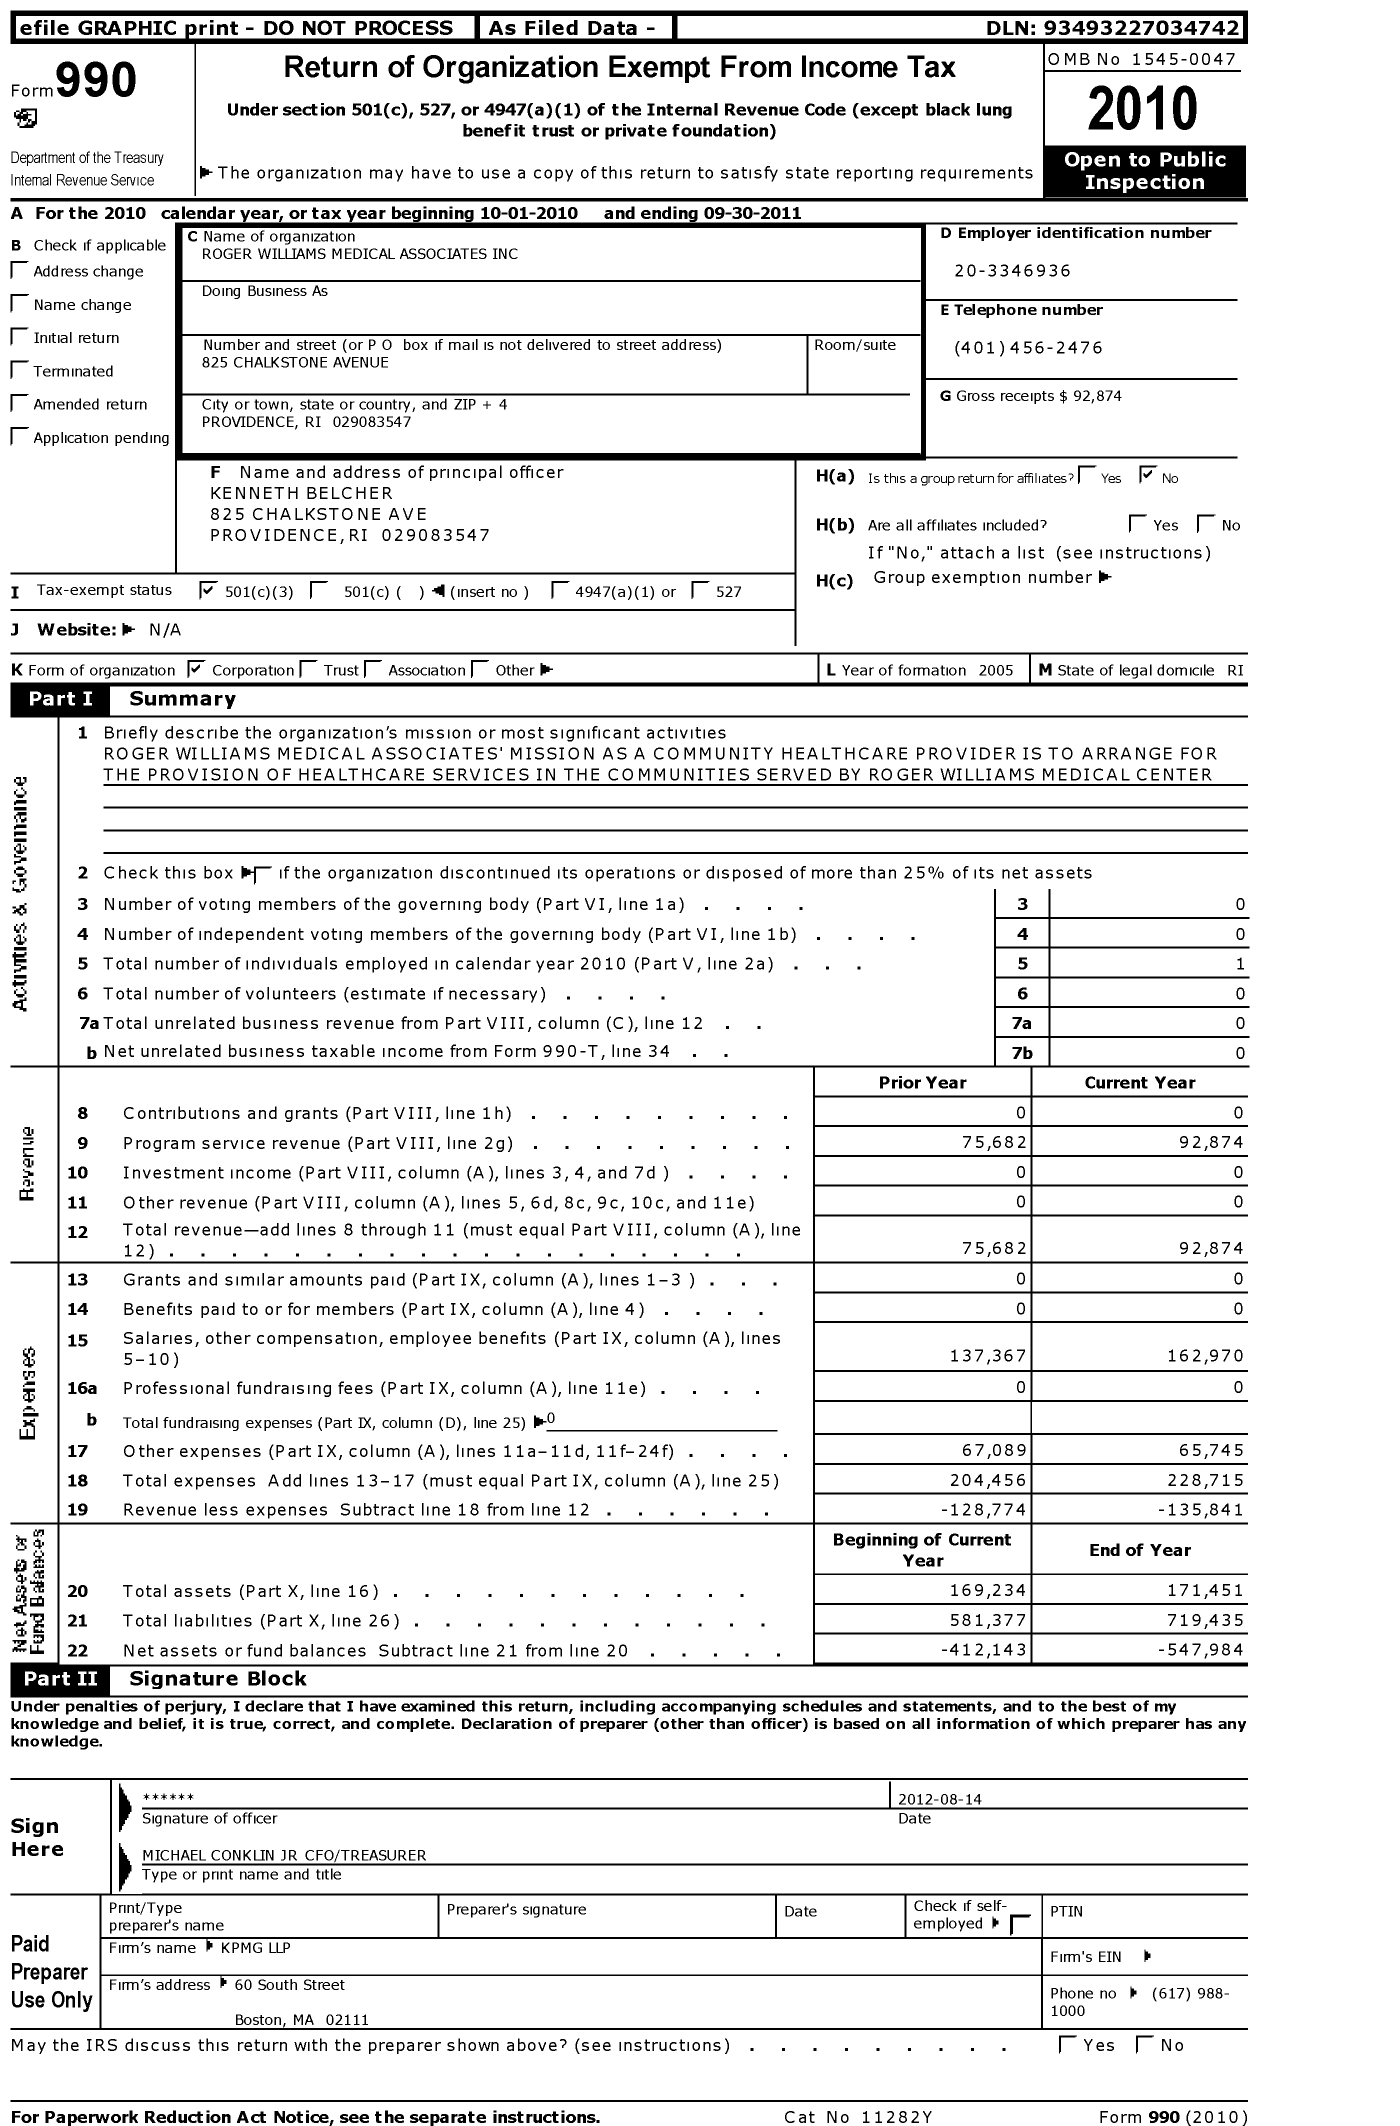 Image of first page of 2010 Form 990 for Roger Williams Medical Associates